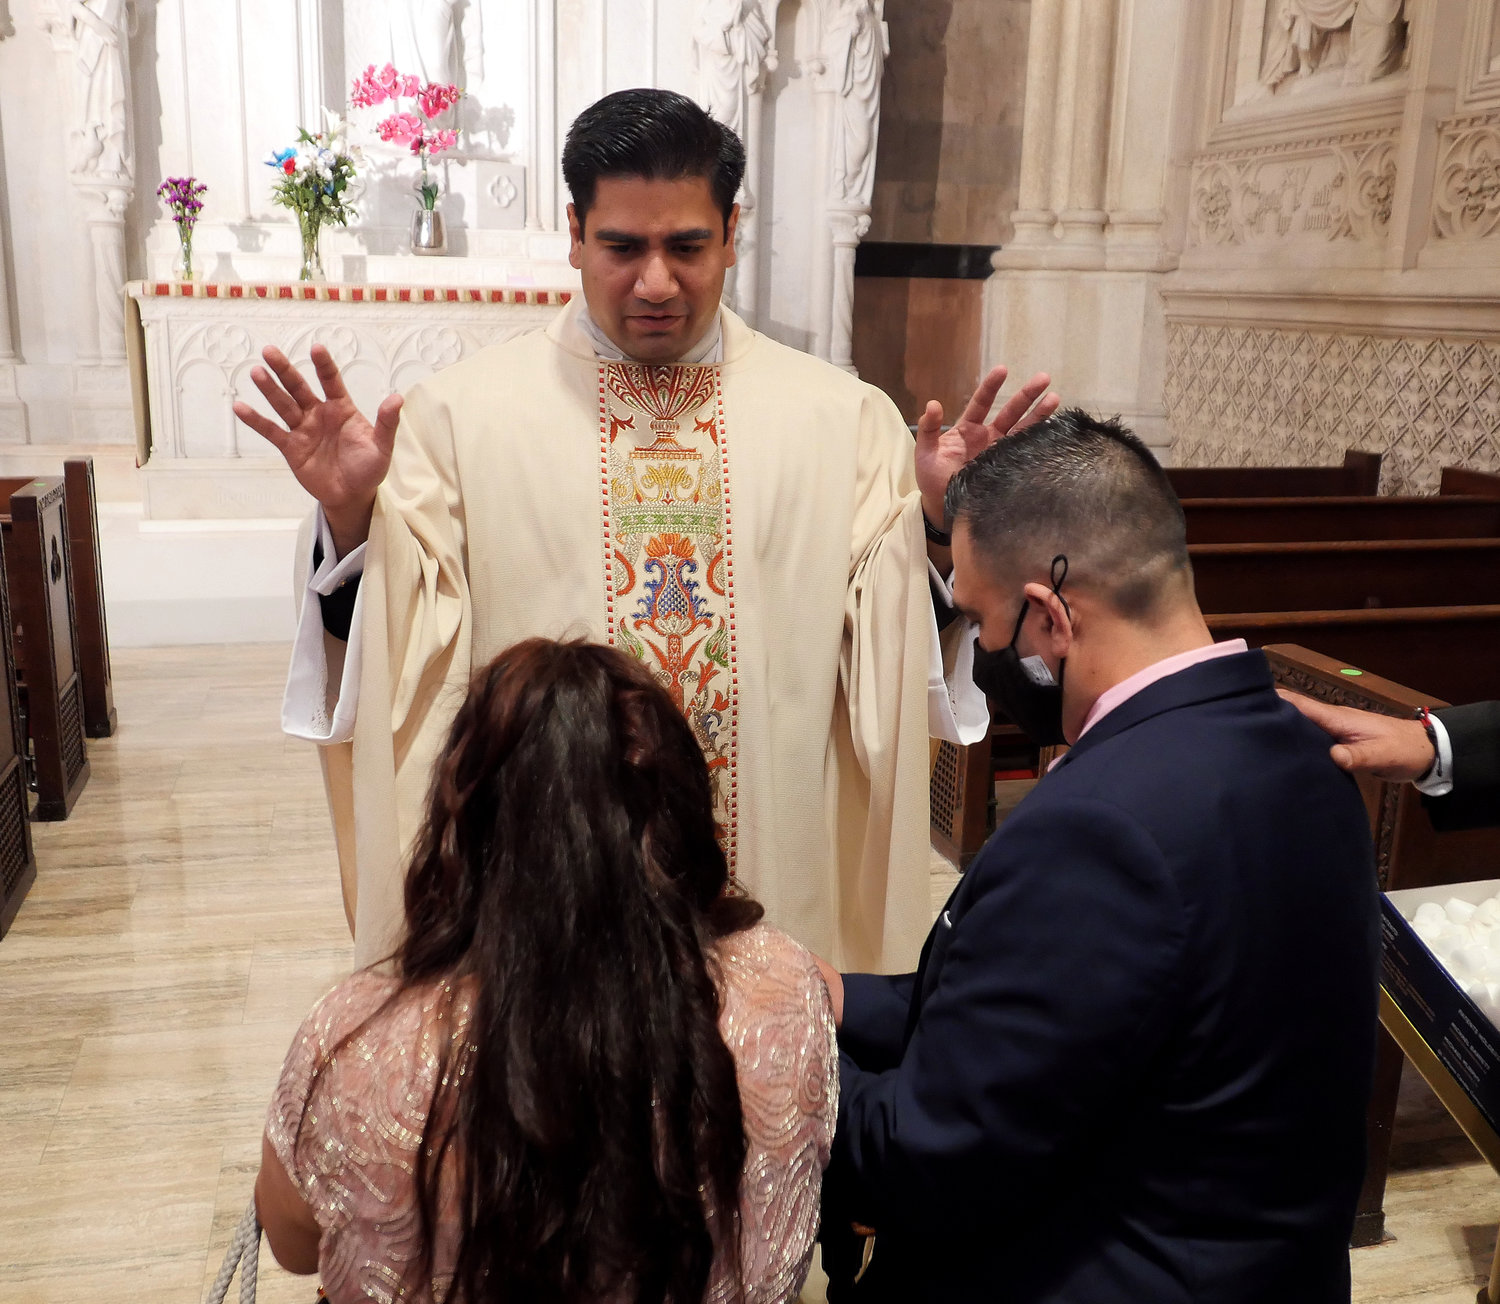 Father Luis Silva offers a first blessing after the Mass of Ordination.